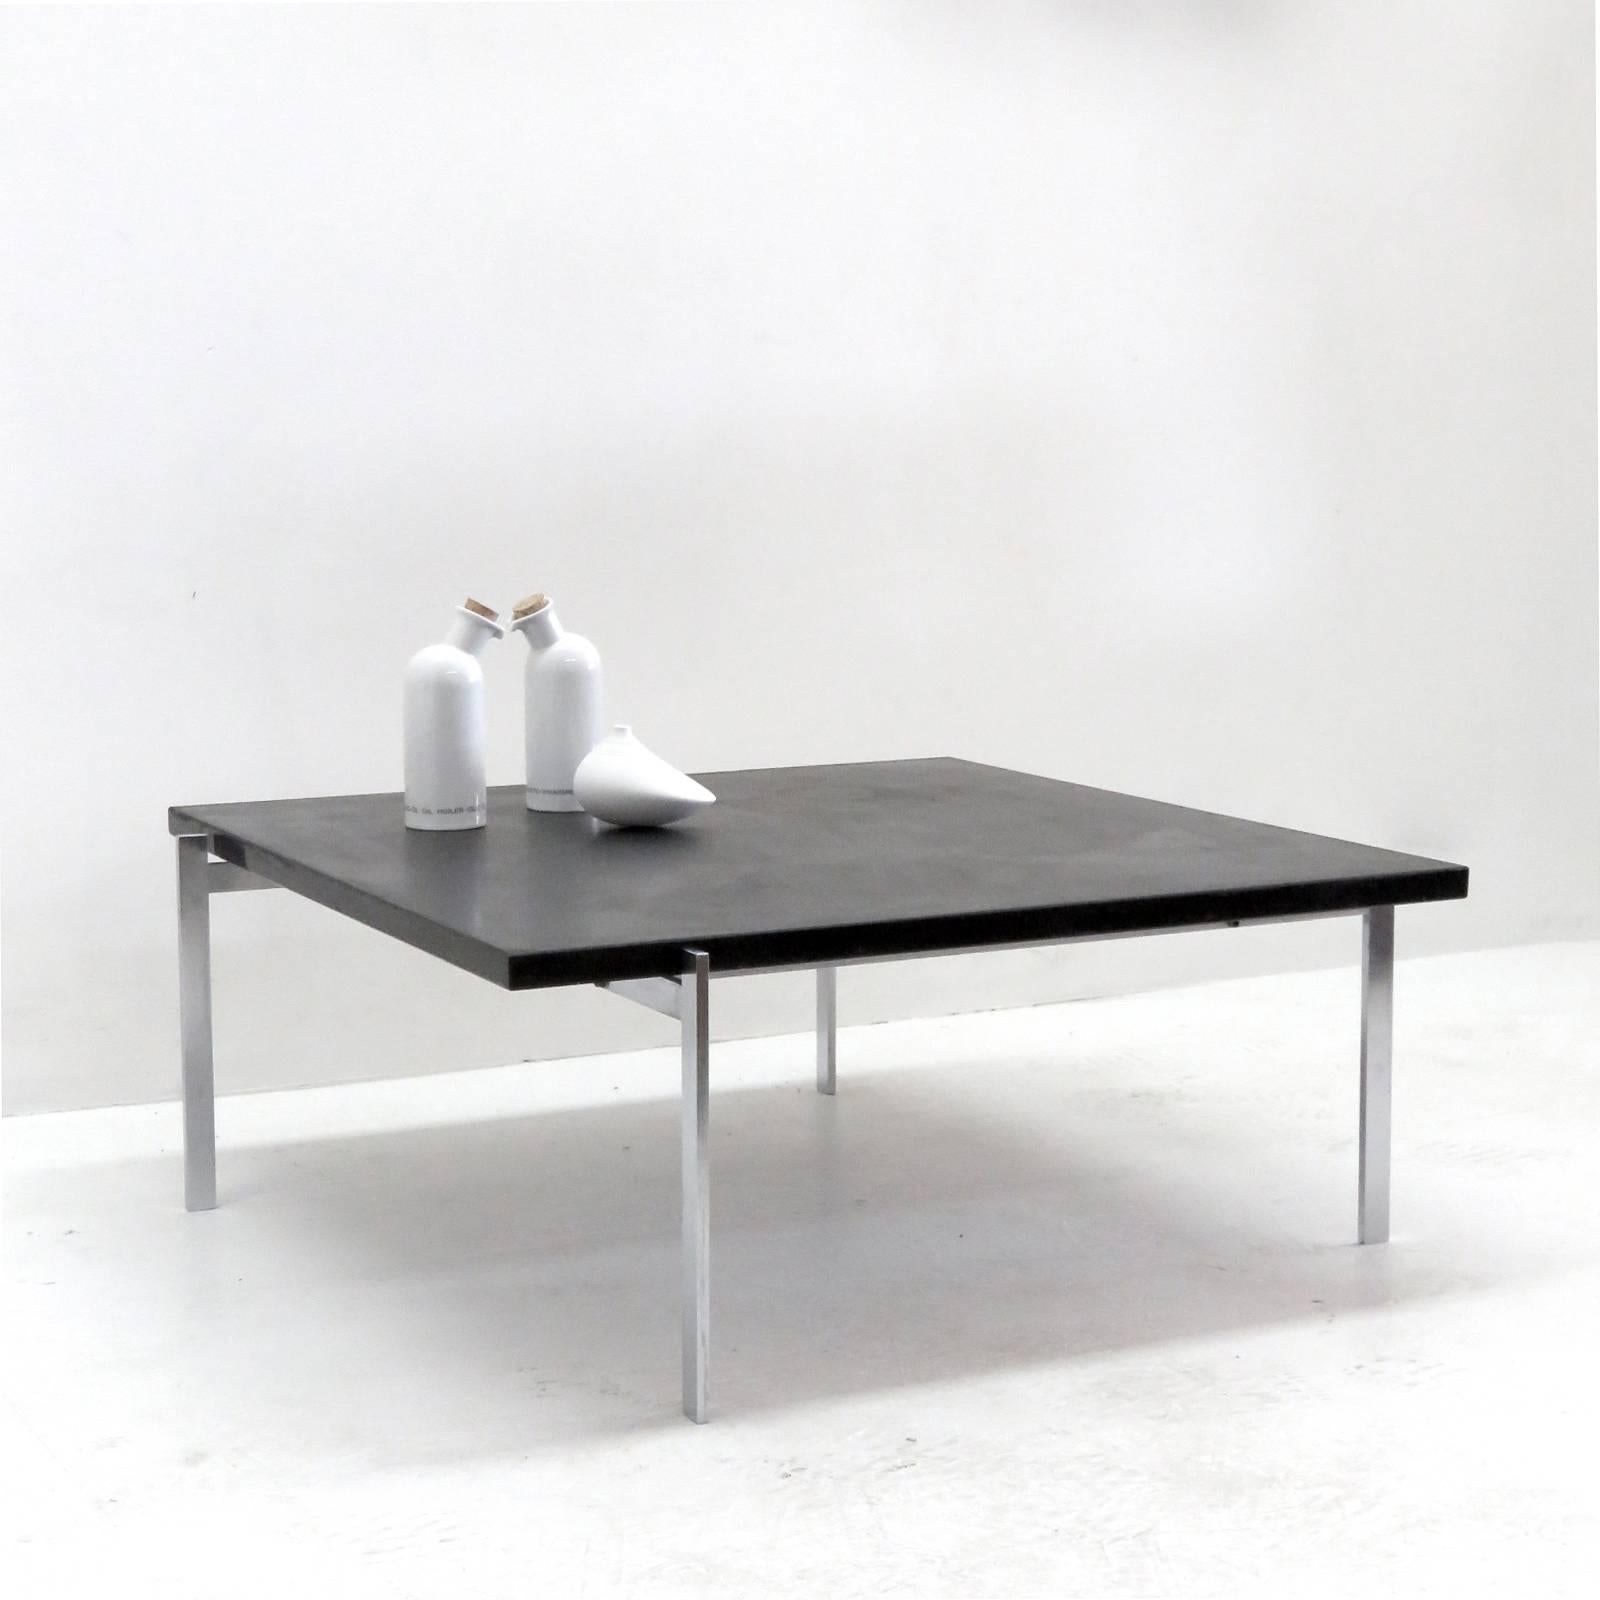 Iconic early version PK-61 coffee table, designed by Poul Kjærholm, 1969 for E. Kold Christensen, Denmark, 1956-1981 in brushed, chromium-plated steel with a slate top, marked with EKC logo.